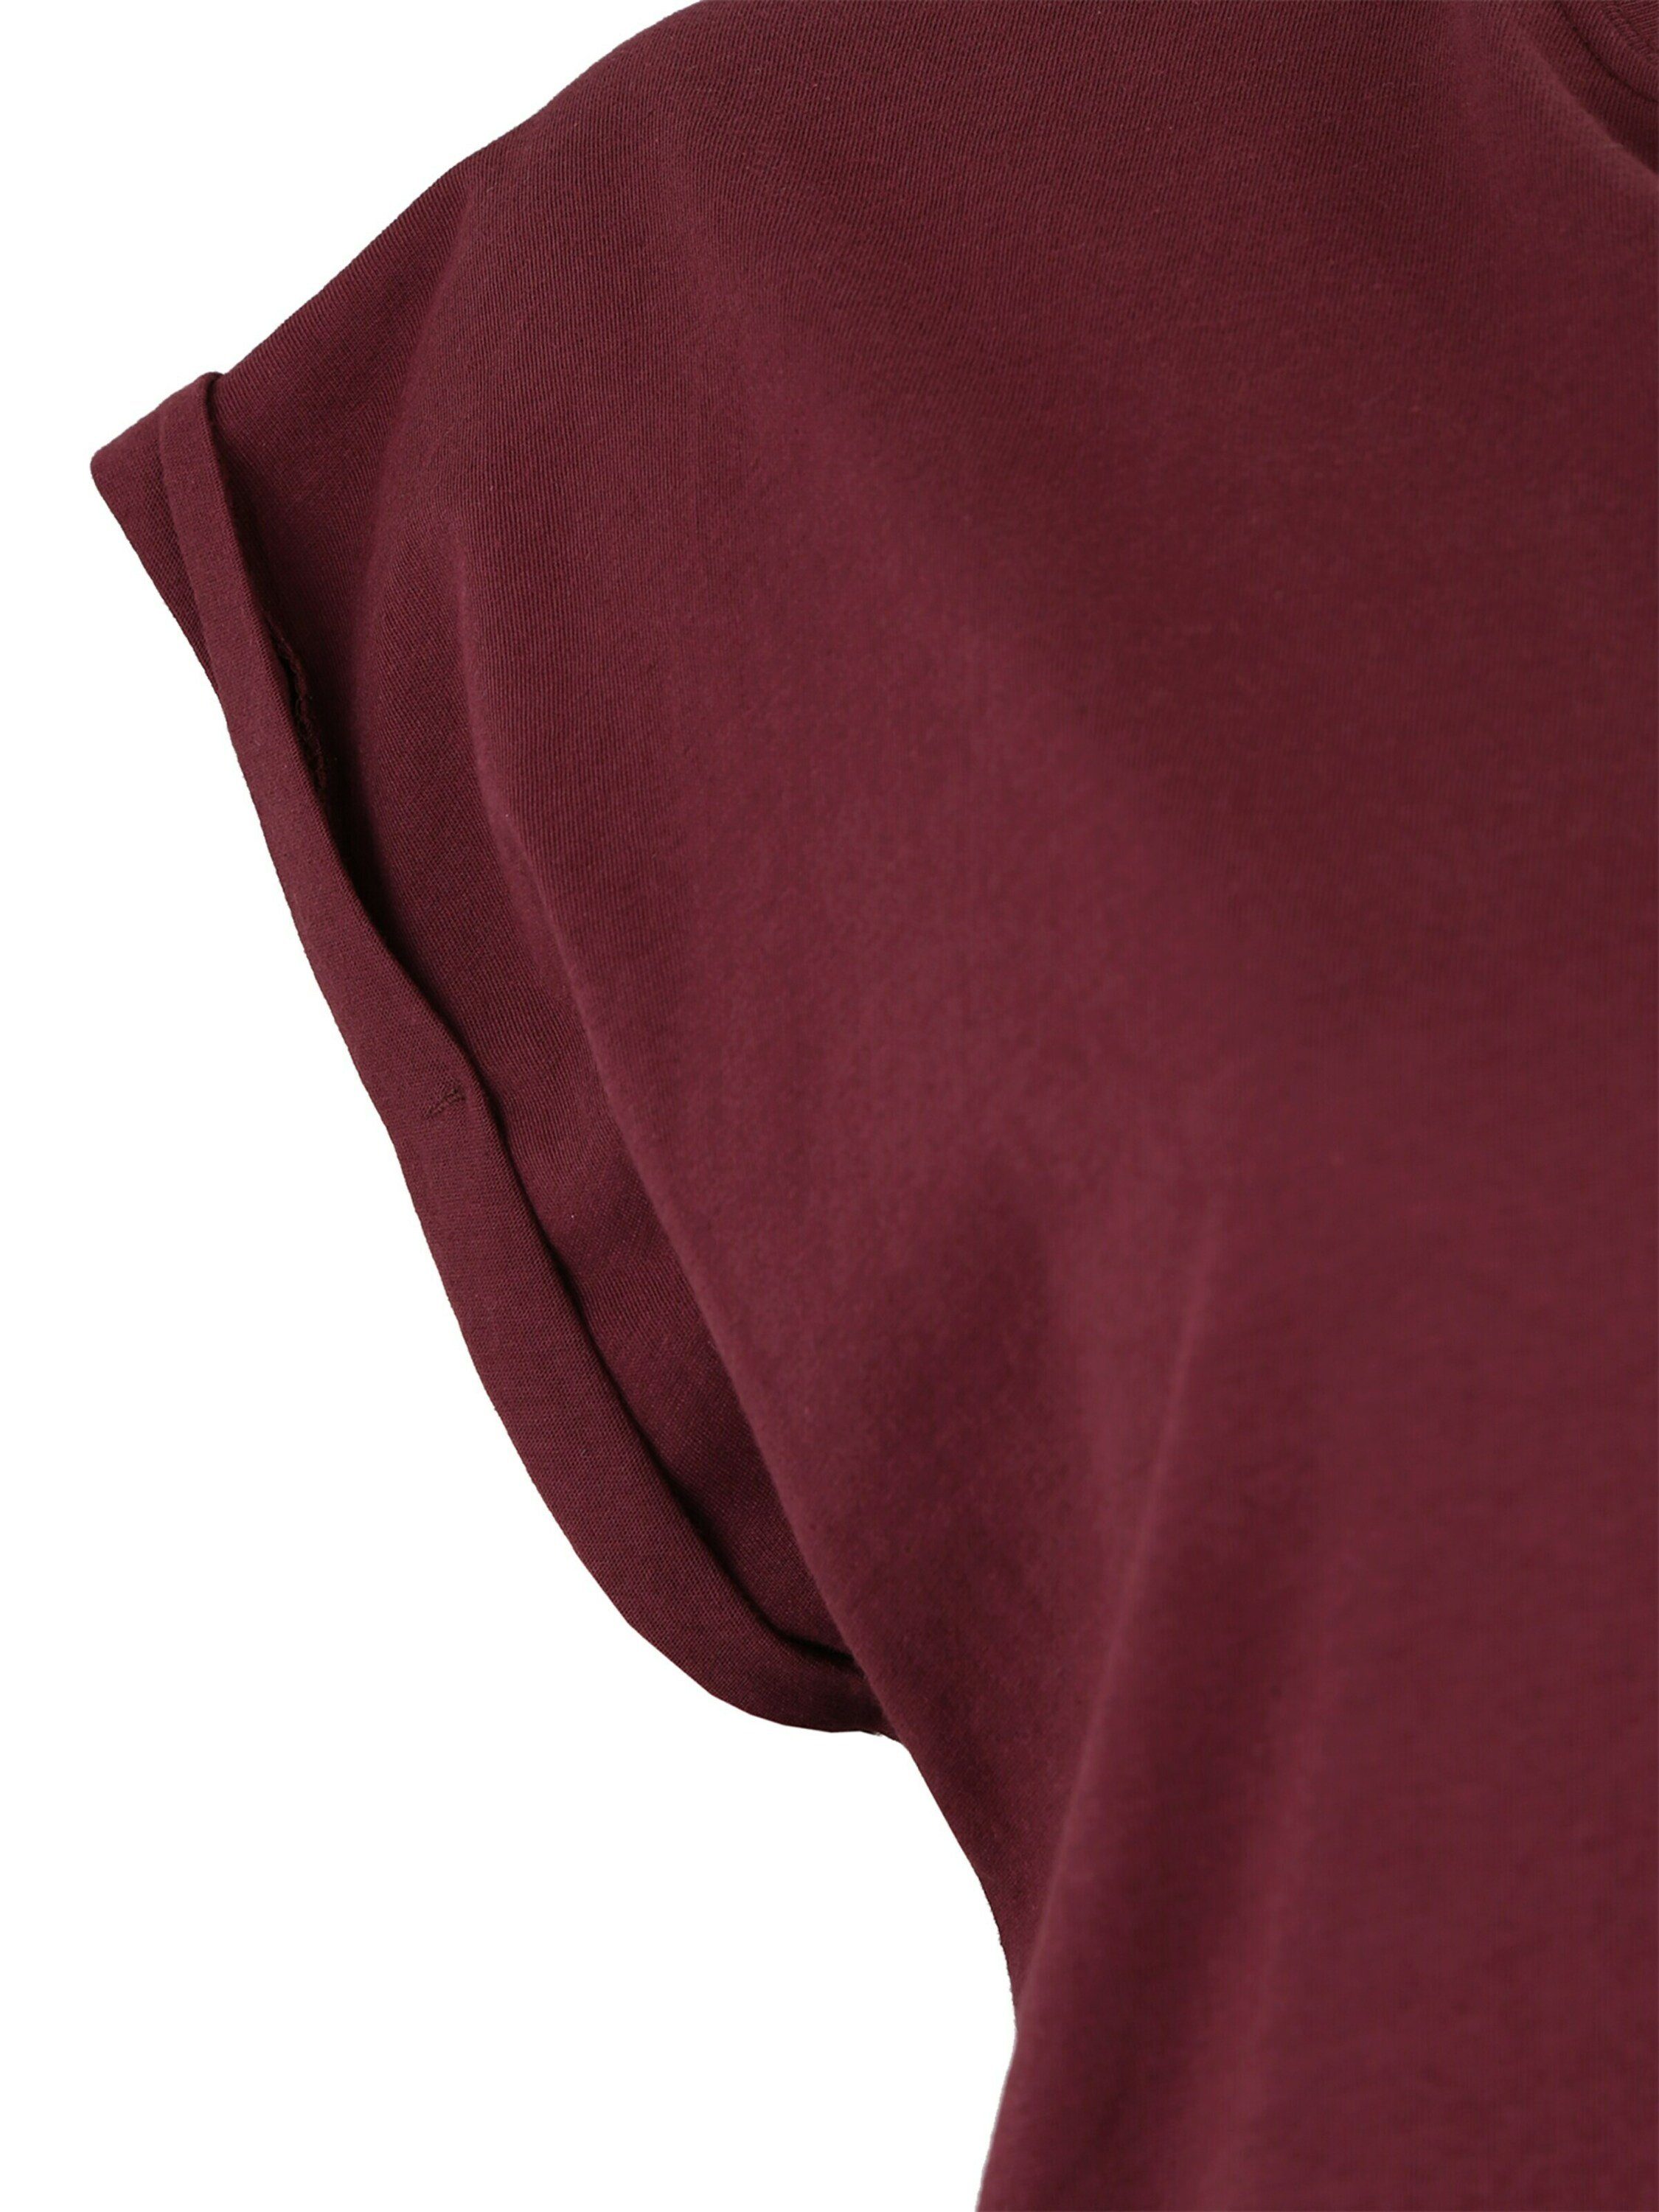 T-Shirt CLASSICS Details, (1-tlg) brombeer Plain/ohne URBAN Detail Weiteres